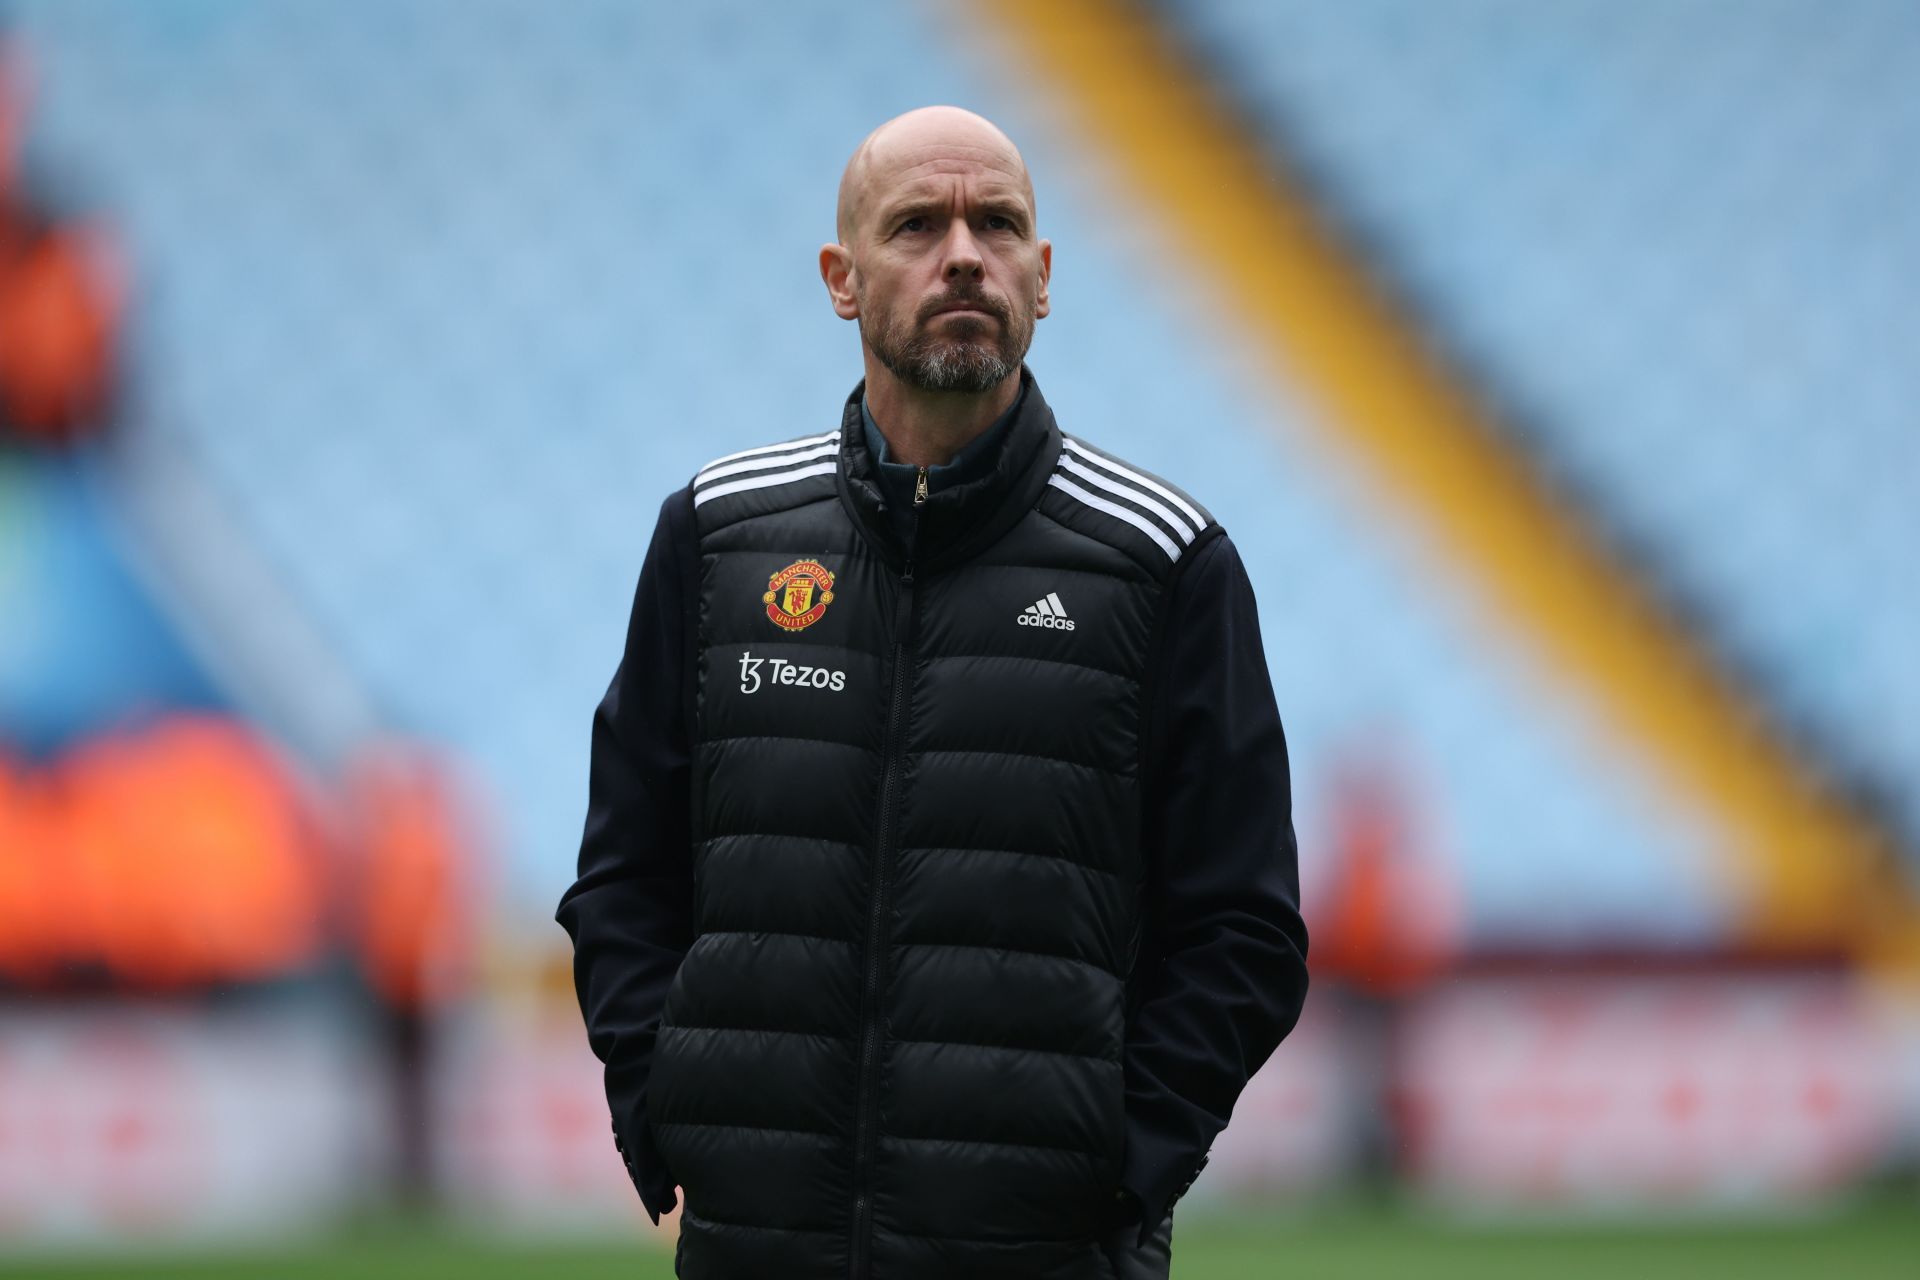 Ten Hag is trying to implement his philosophy at United